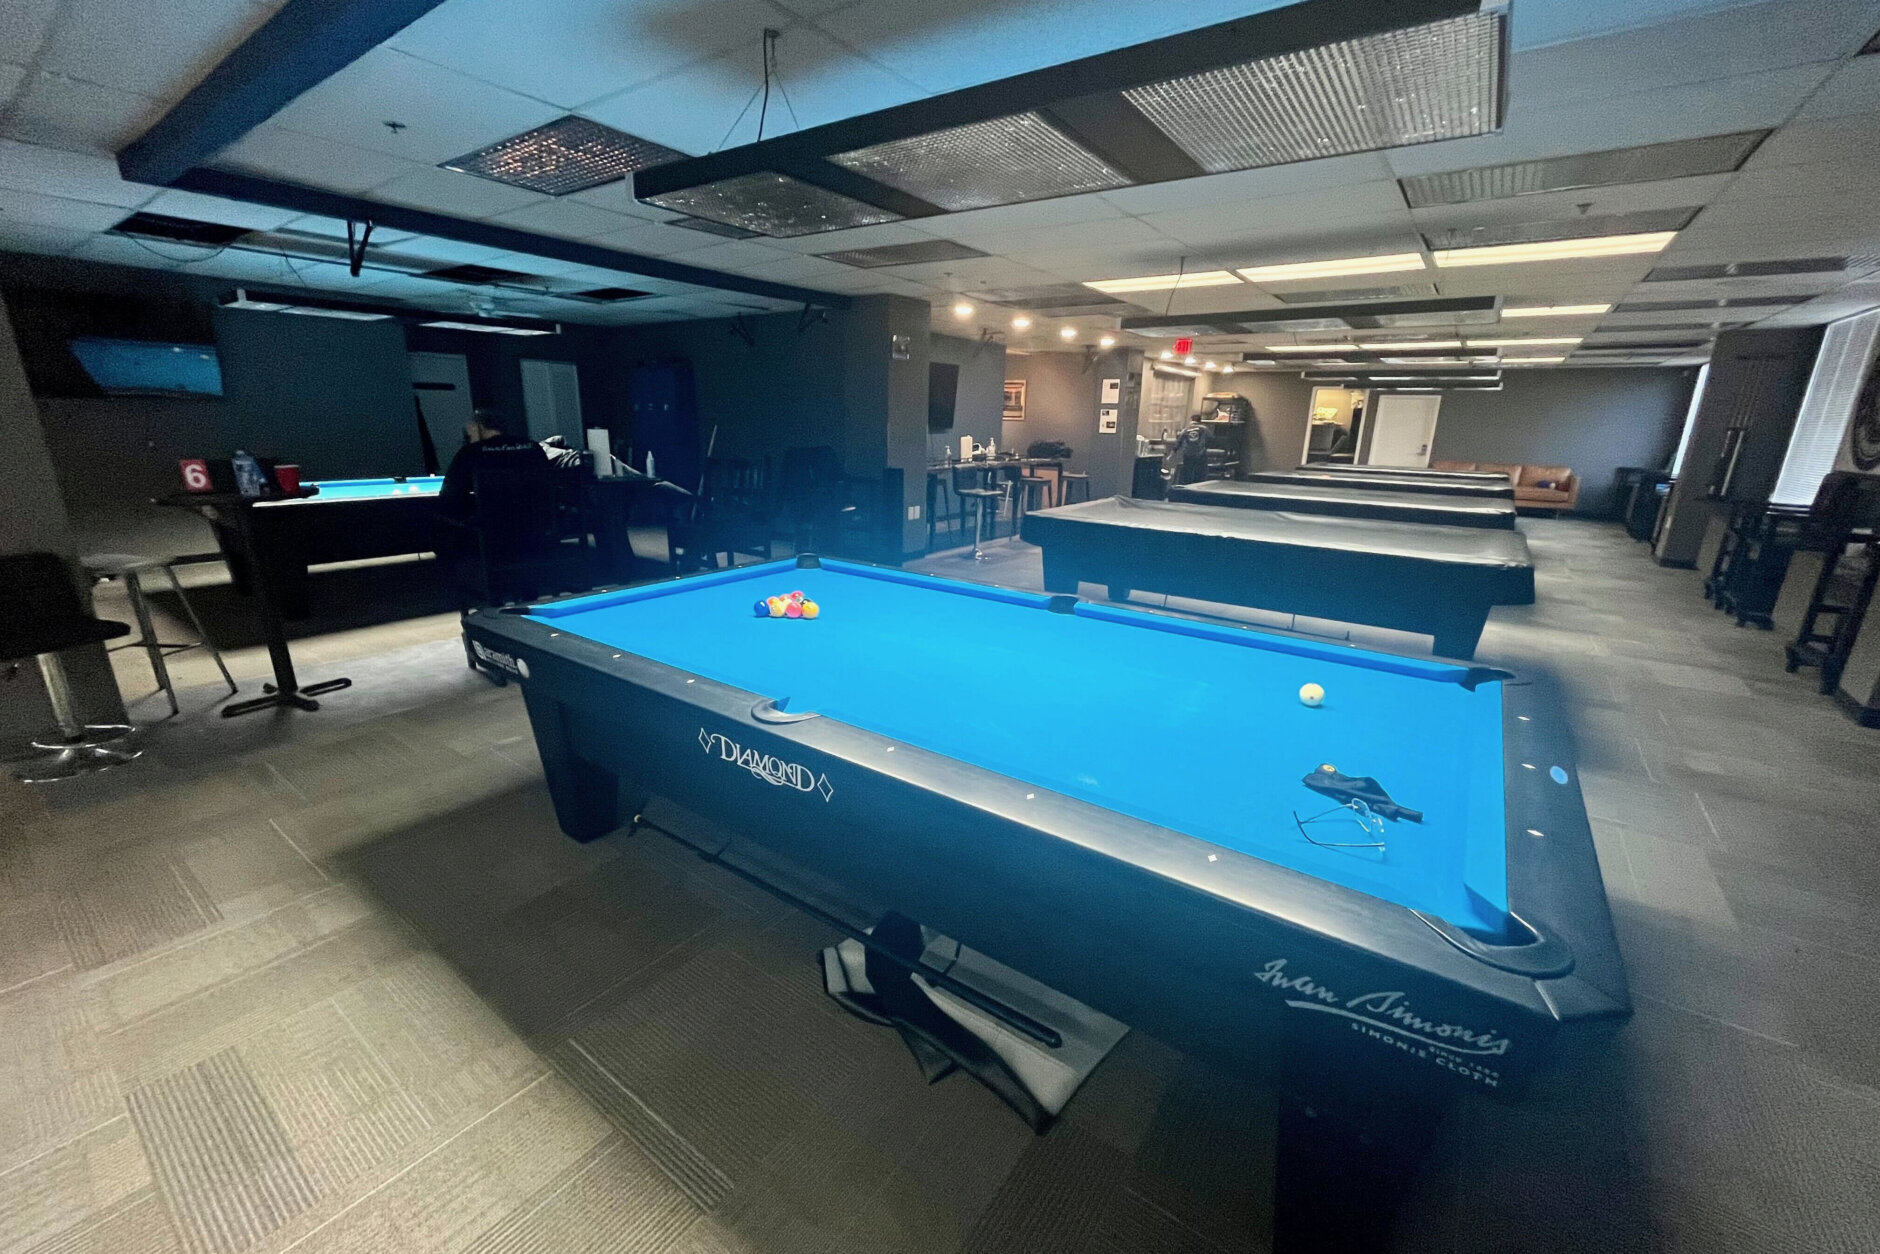 It looks like a typical office building along South Whiting Street in Alexandria, Virginia, but inside is a secret pool hall where the world's top players come to practice.